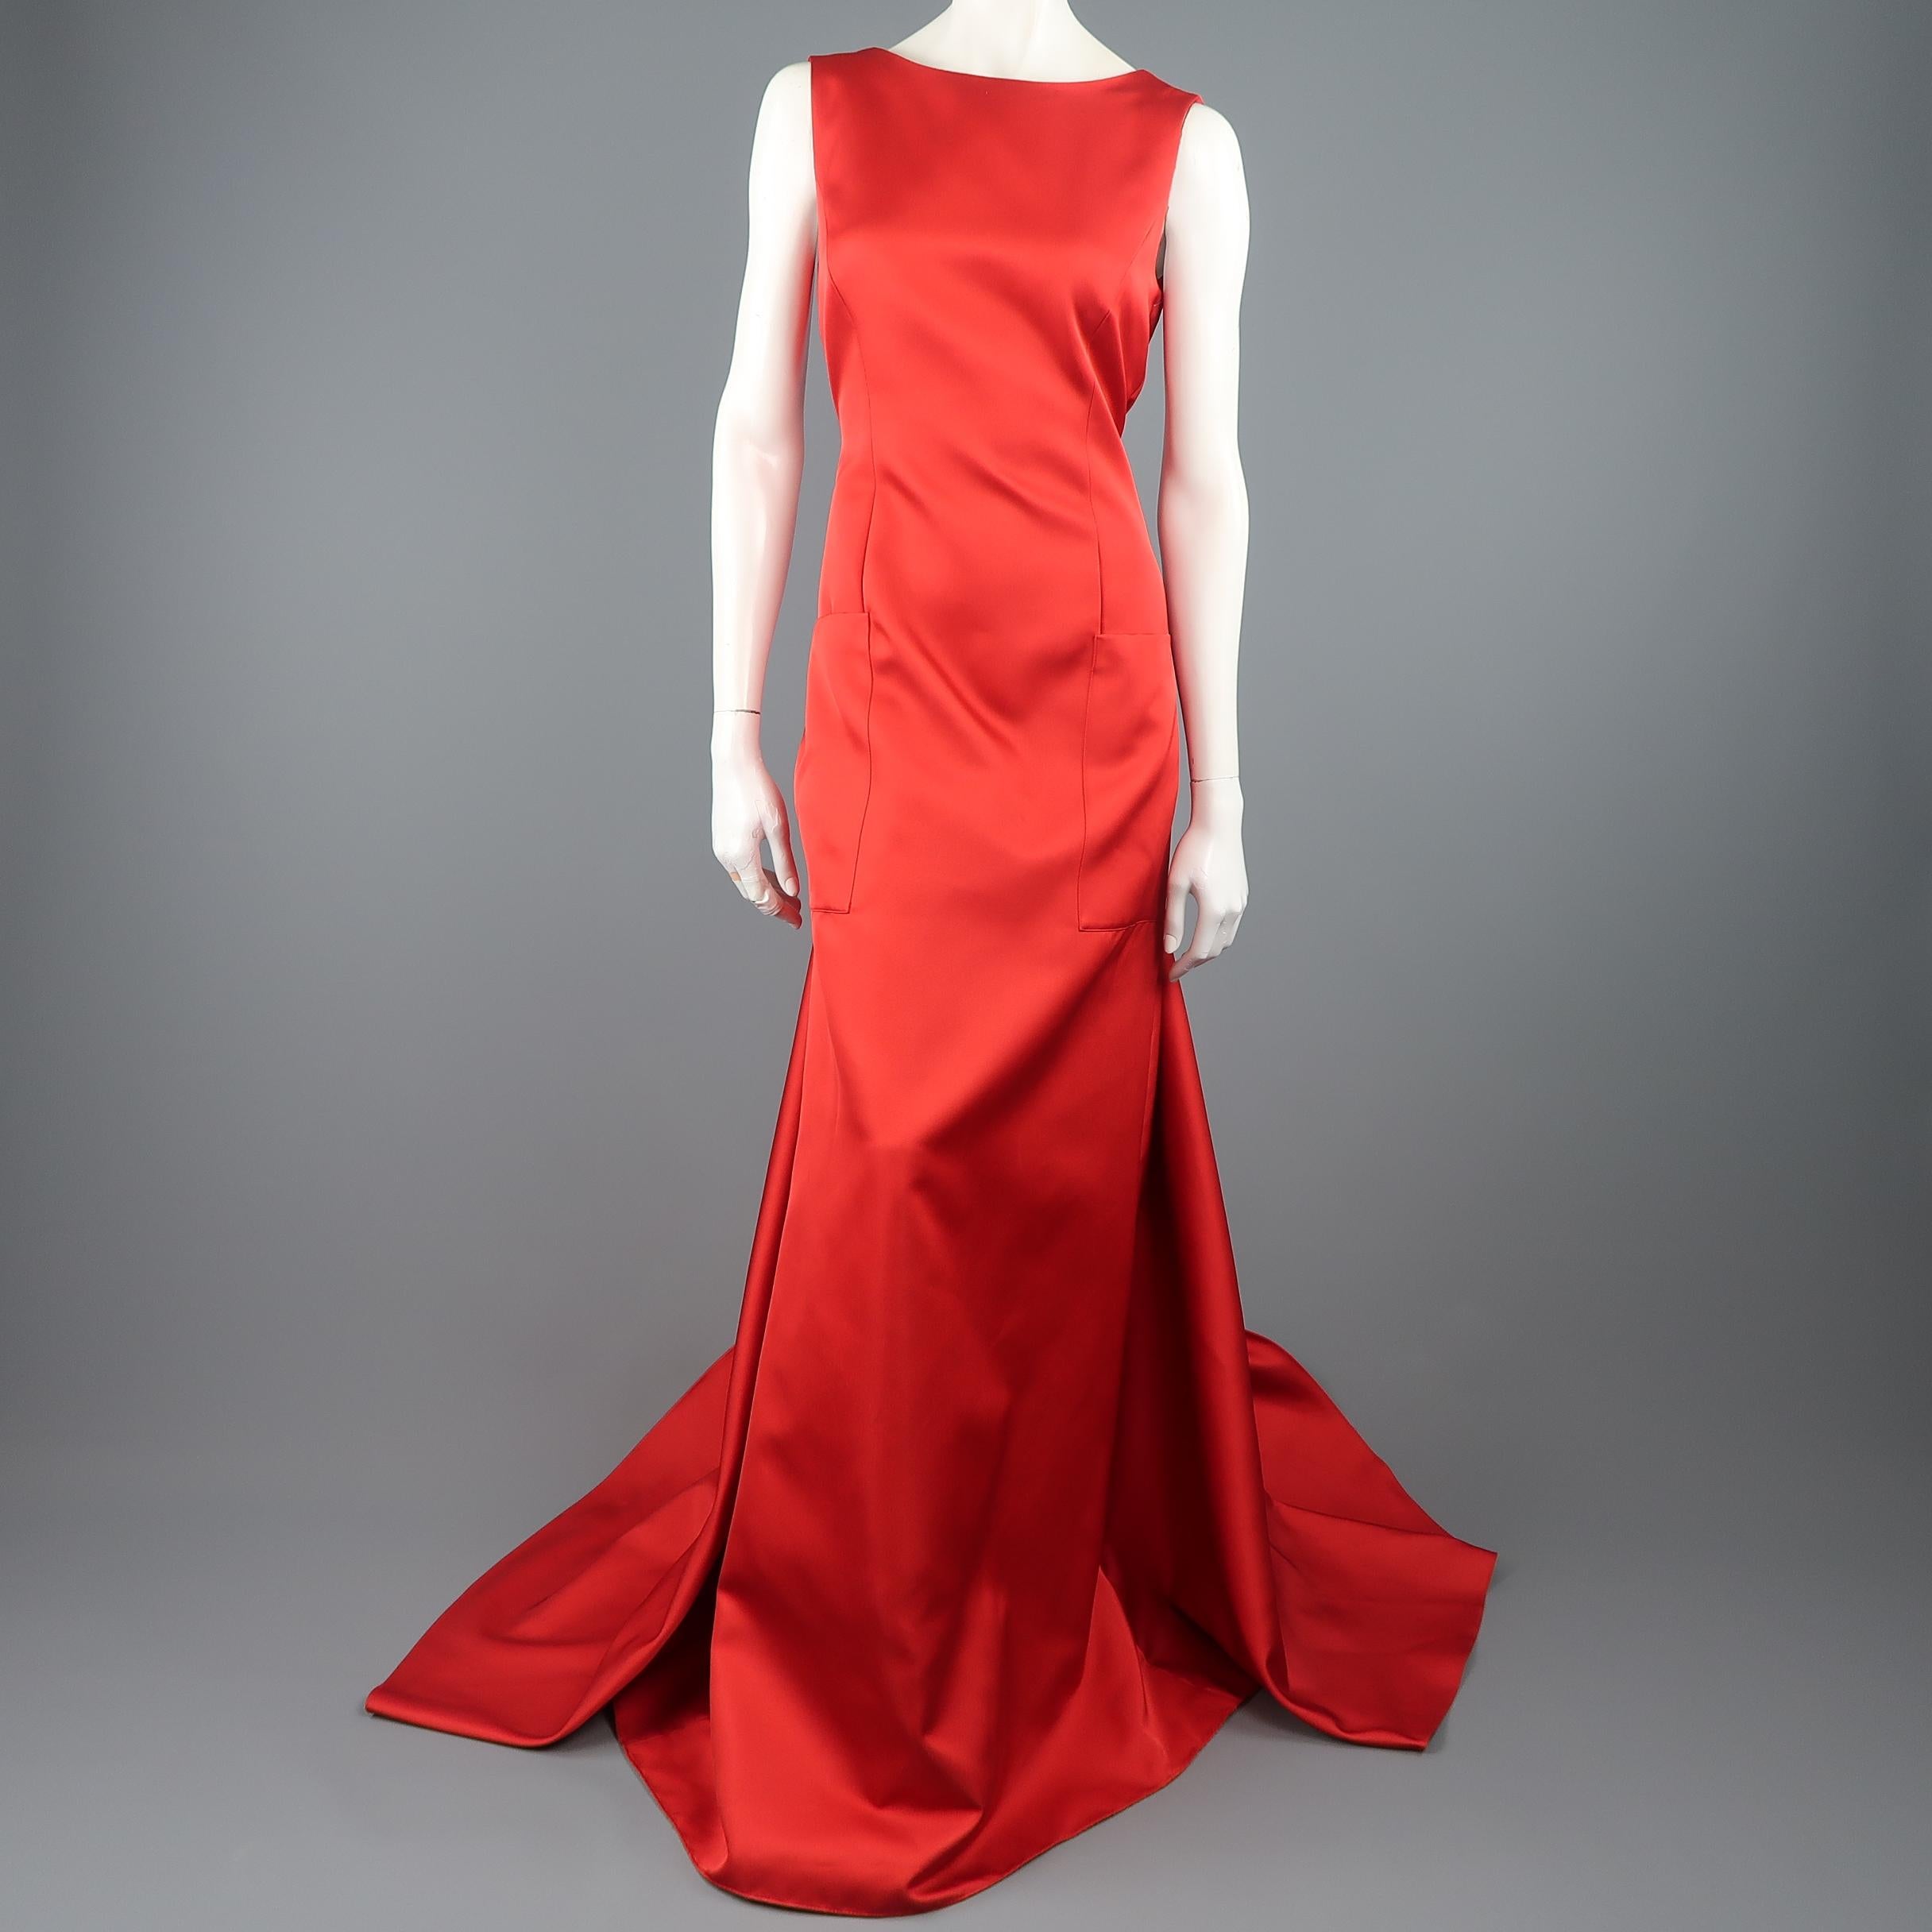 CH Carolina Herrera Spring 2016 Collection evening gown comes in bold red textured satin with a scoop boat neck, oversized patch pockets, open back, and full train. Minor wear throughout. Made in Portugal.
 
Good Pre-Owned Condition.
Marked: 6
